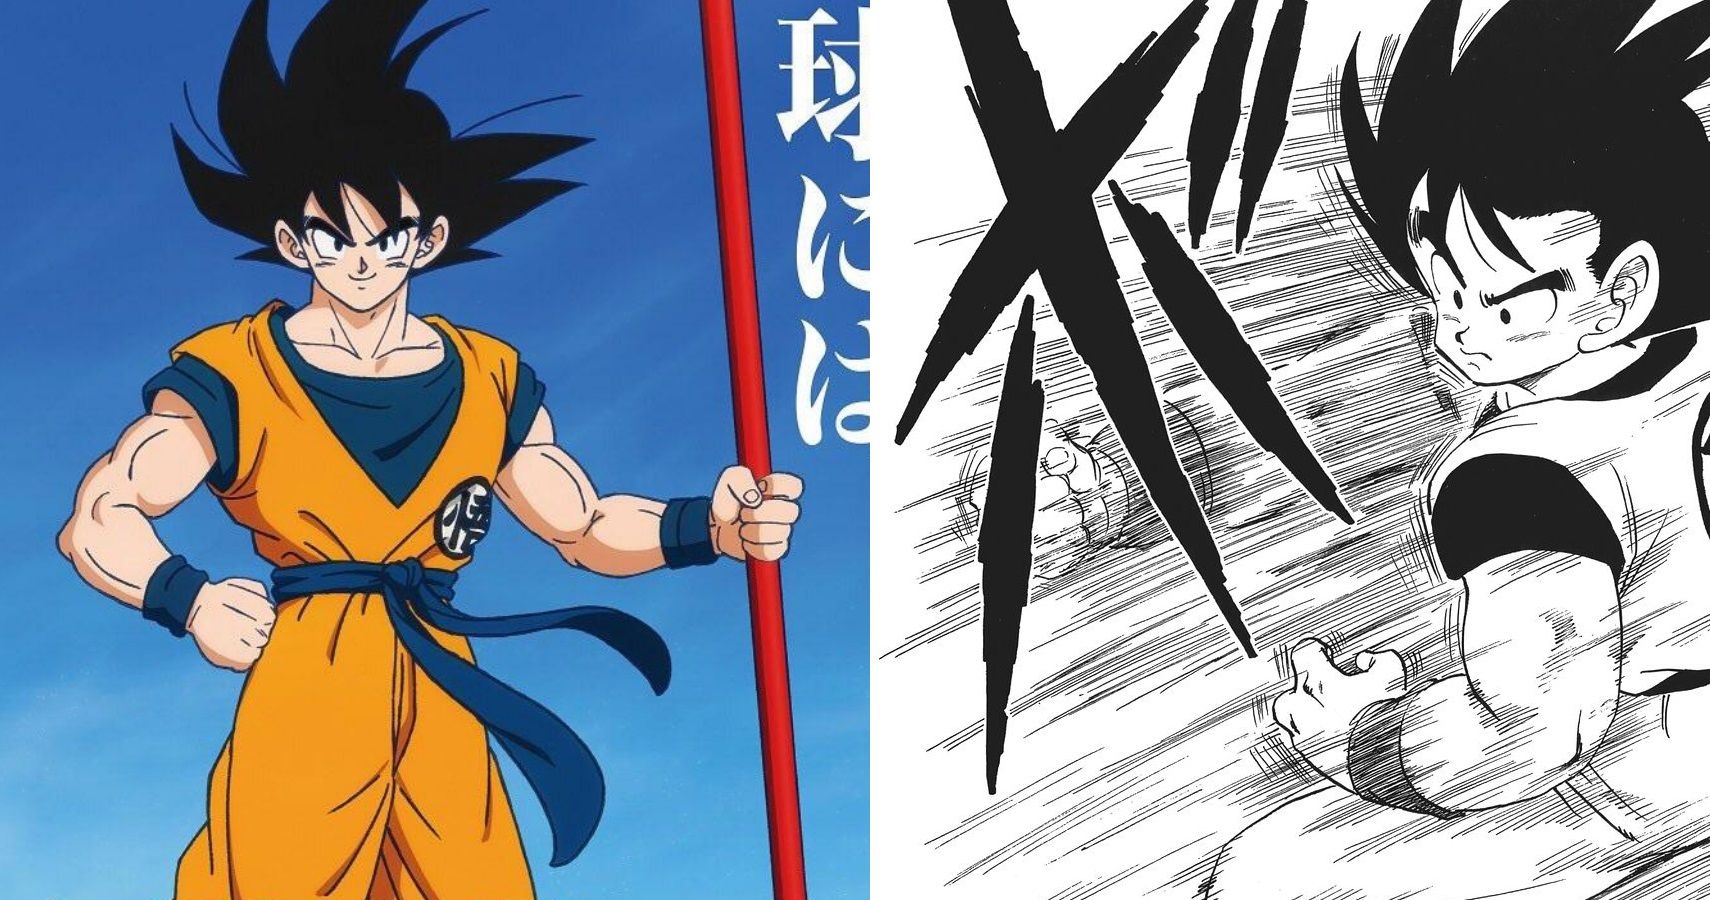 The male Saiyan fighting pose is reminiscent of Goku's more defensive tight  looking stance except the male saiyan cac has it more 